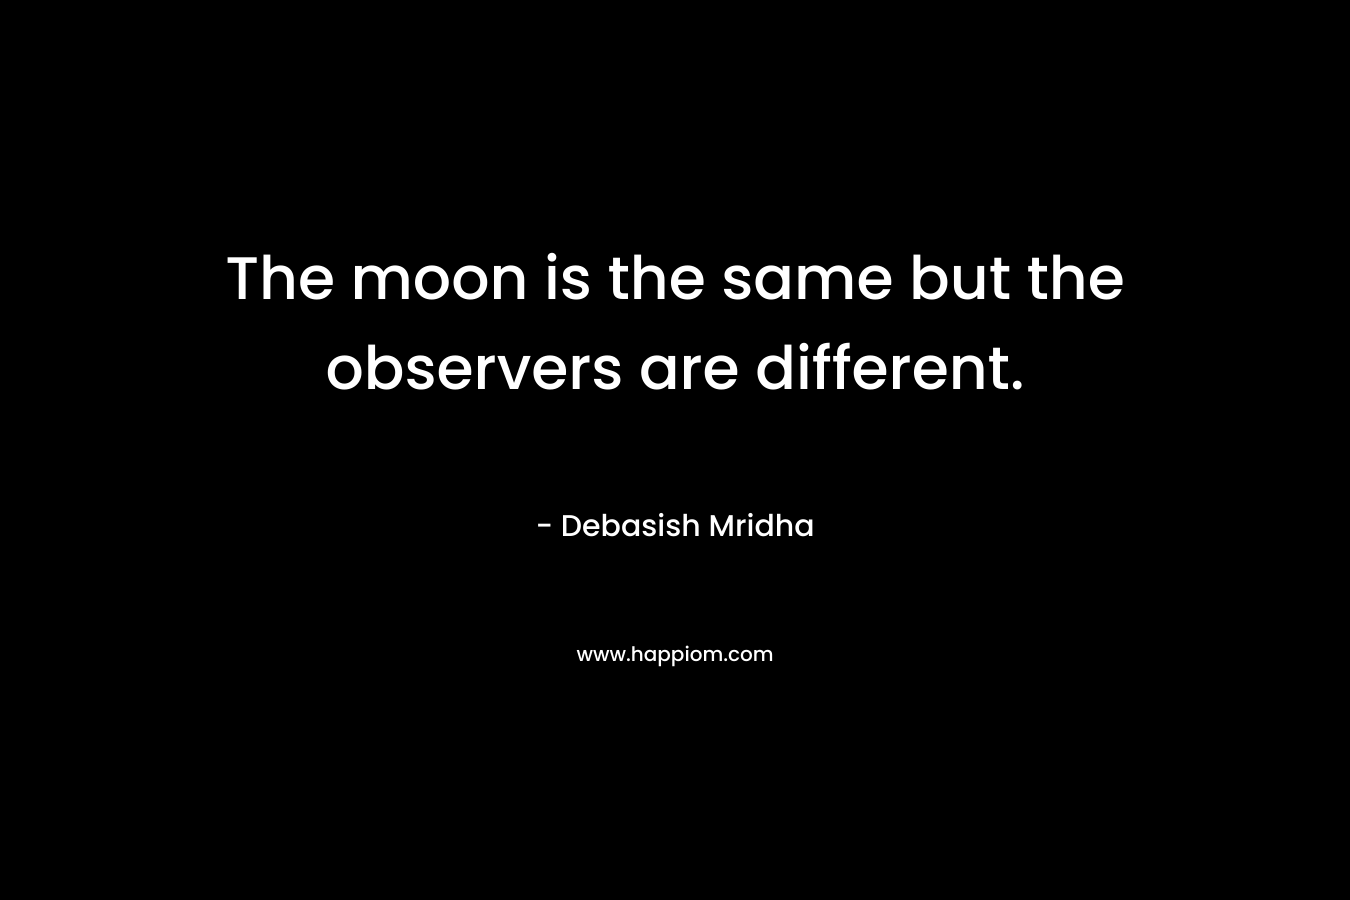 The moon is the same but the observers are different. – Debasish Mridha